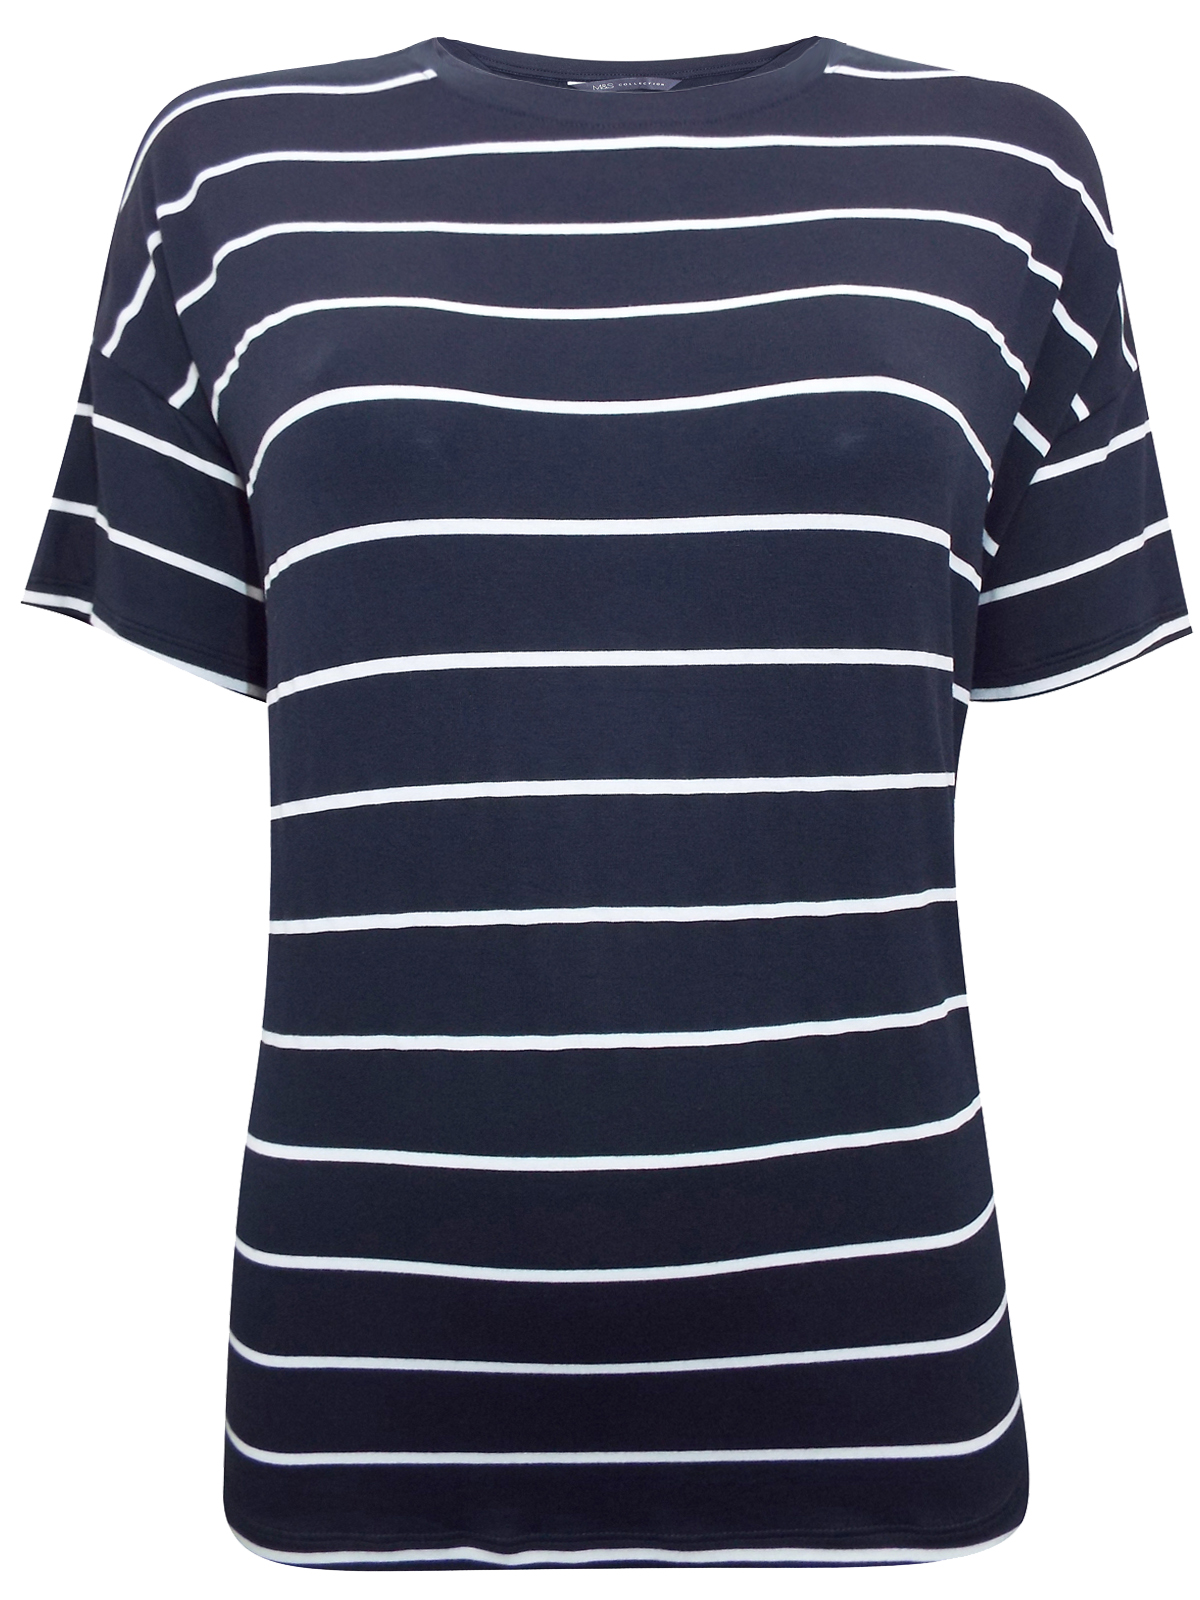 Marks and Spencer - - M&5 NAVY Nautical Stripe Short Sleeve Jersey Top ...